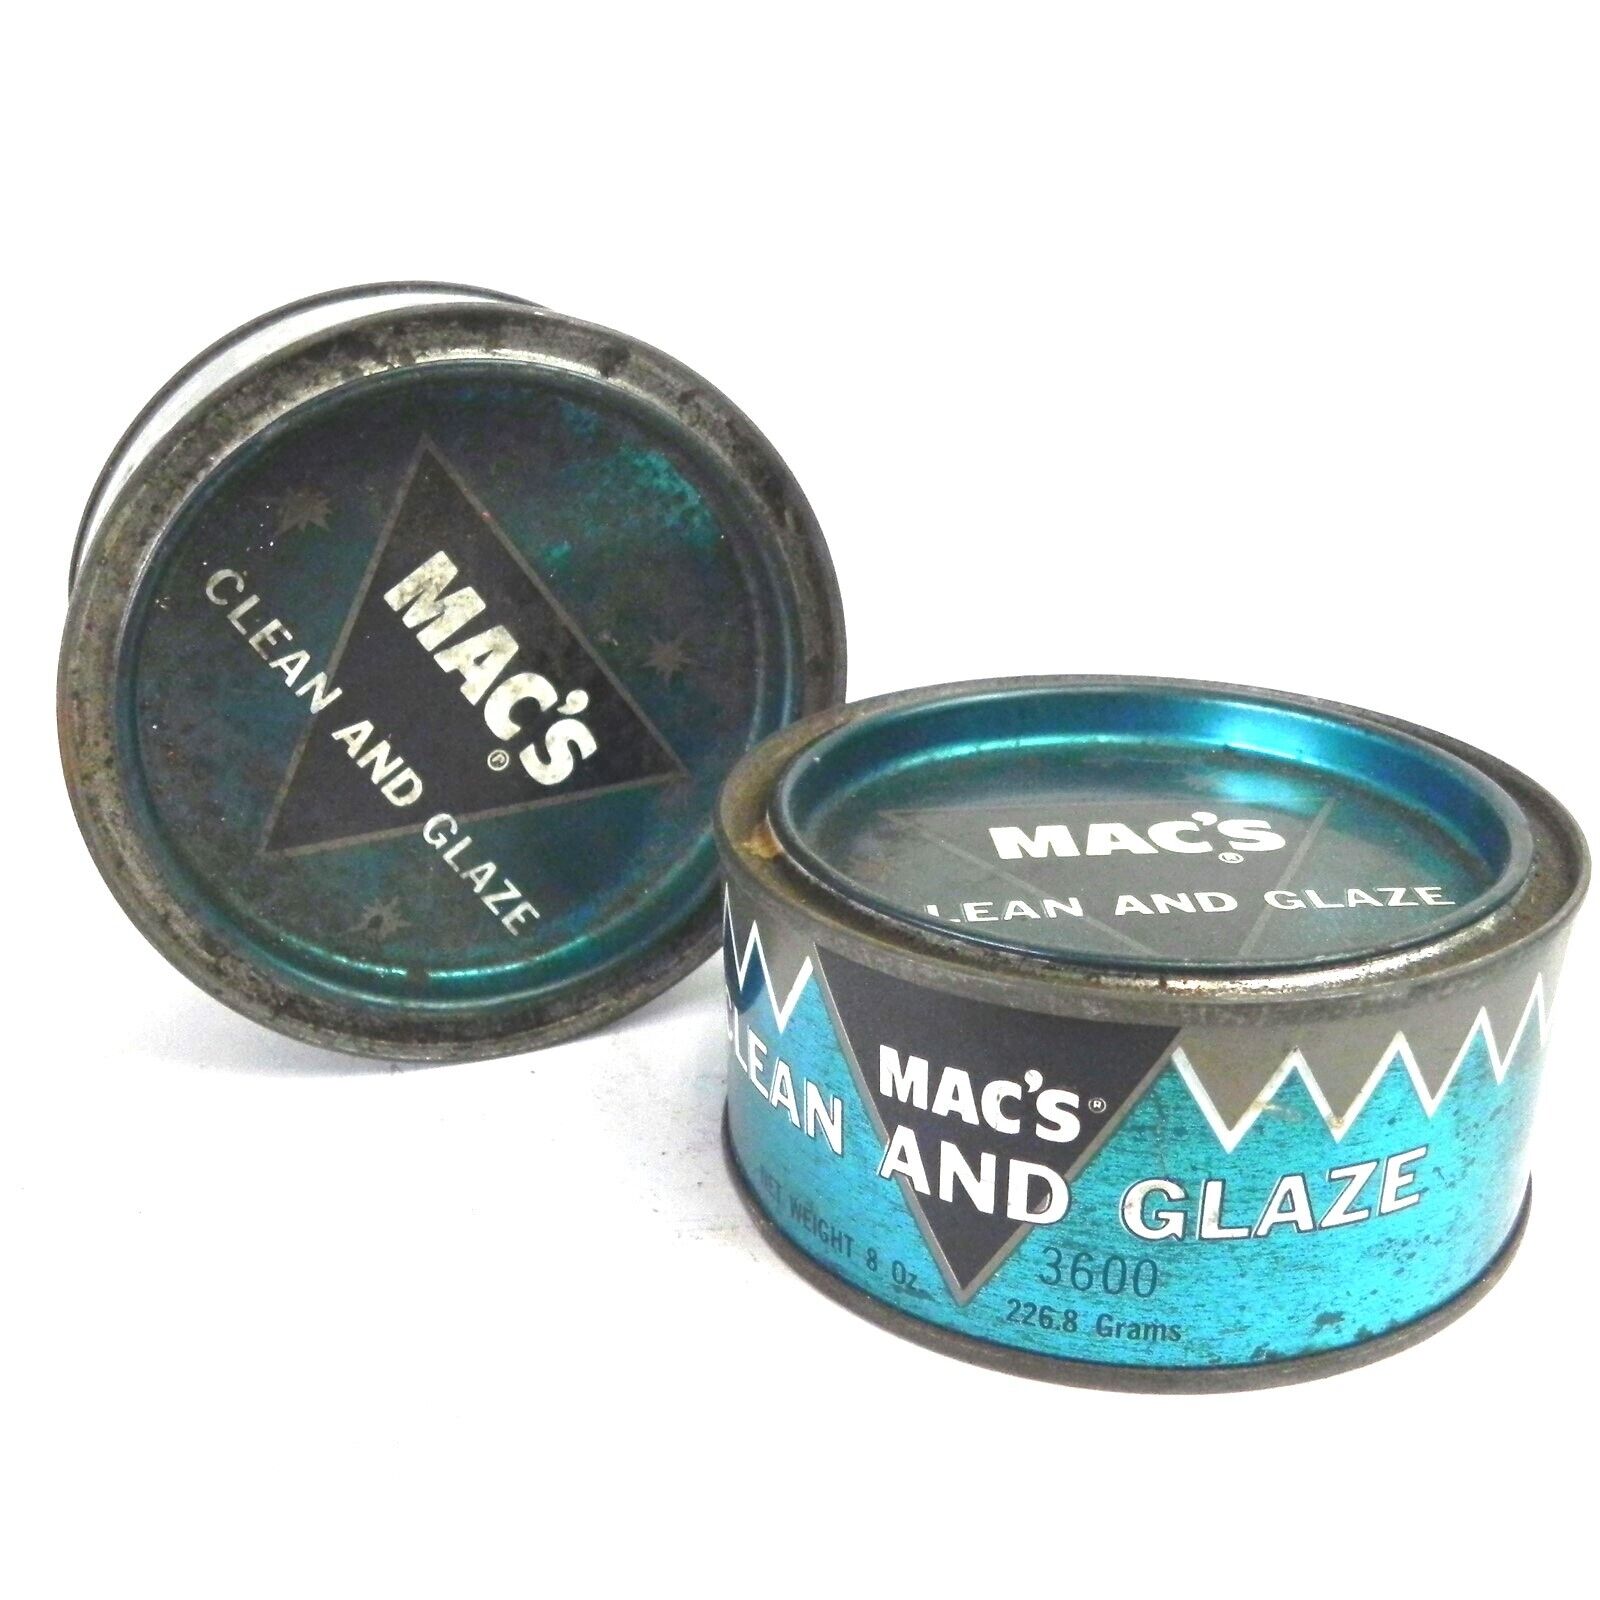 VINTAGE MAC's CLEAN & GLAZE LTO OF 2 8 OZ CANS CONTENTS SOLIDIFIED USED VTG CAN